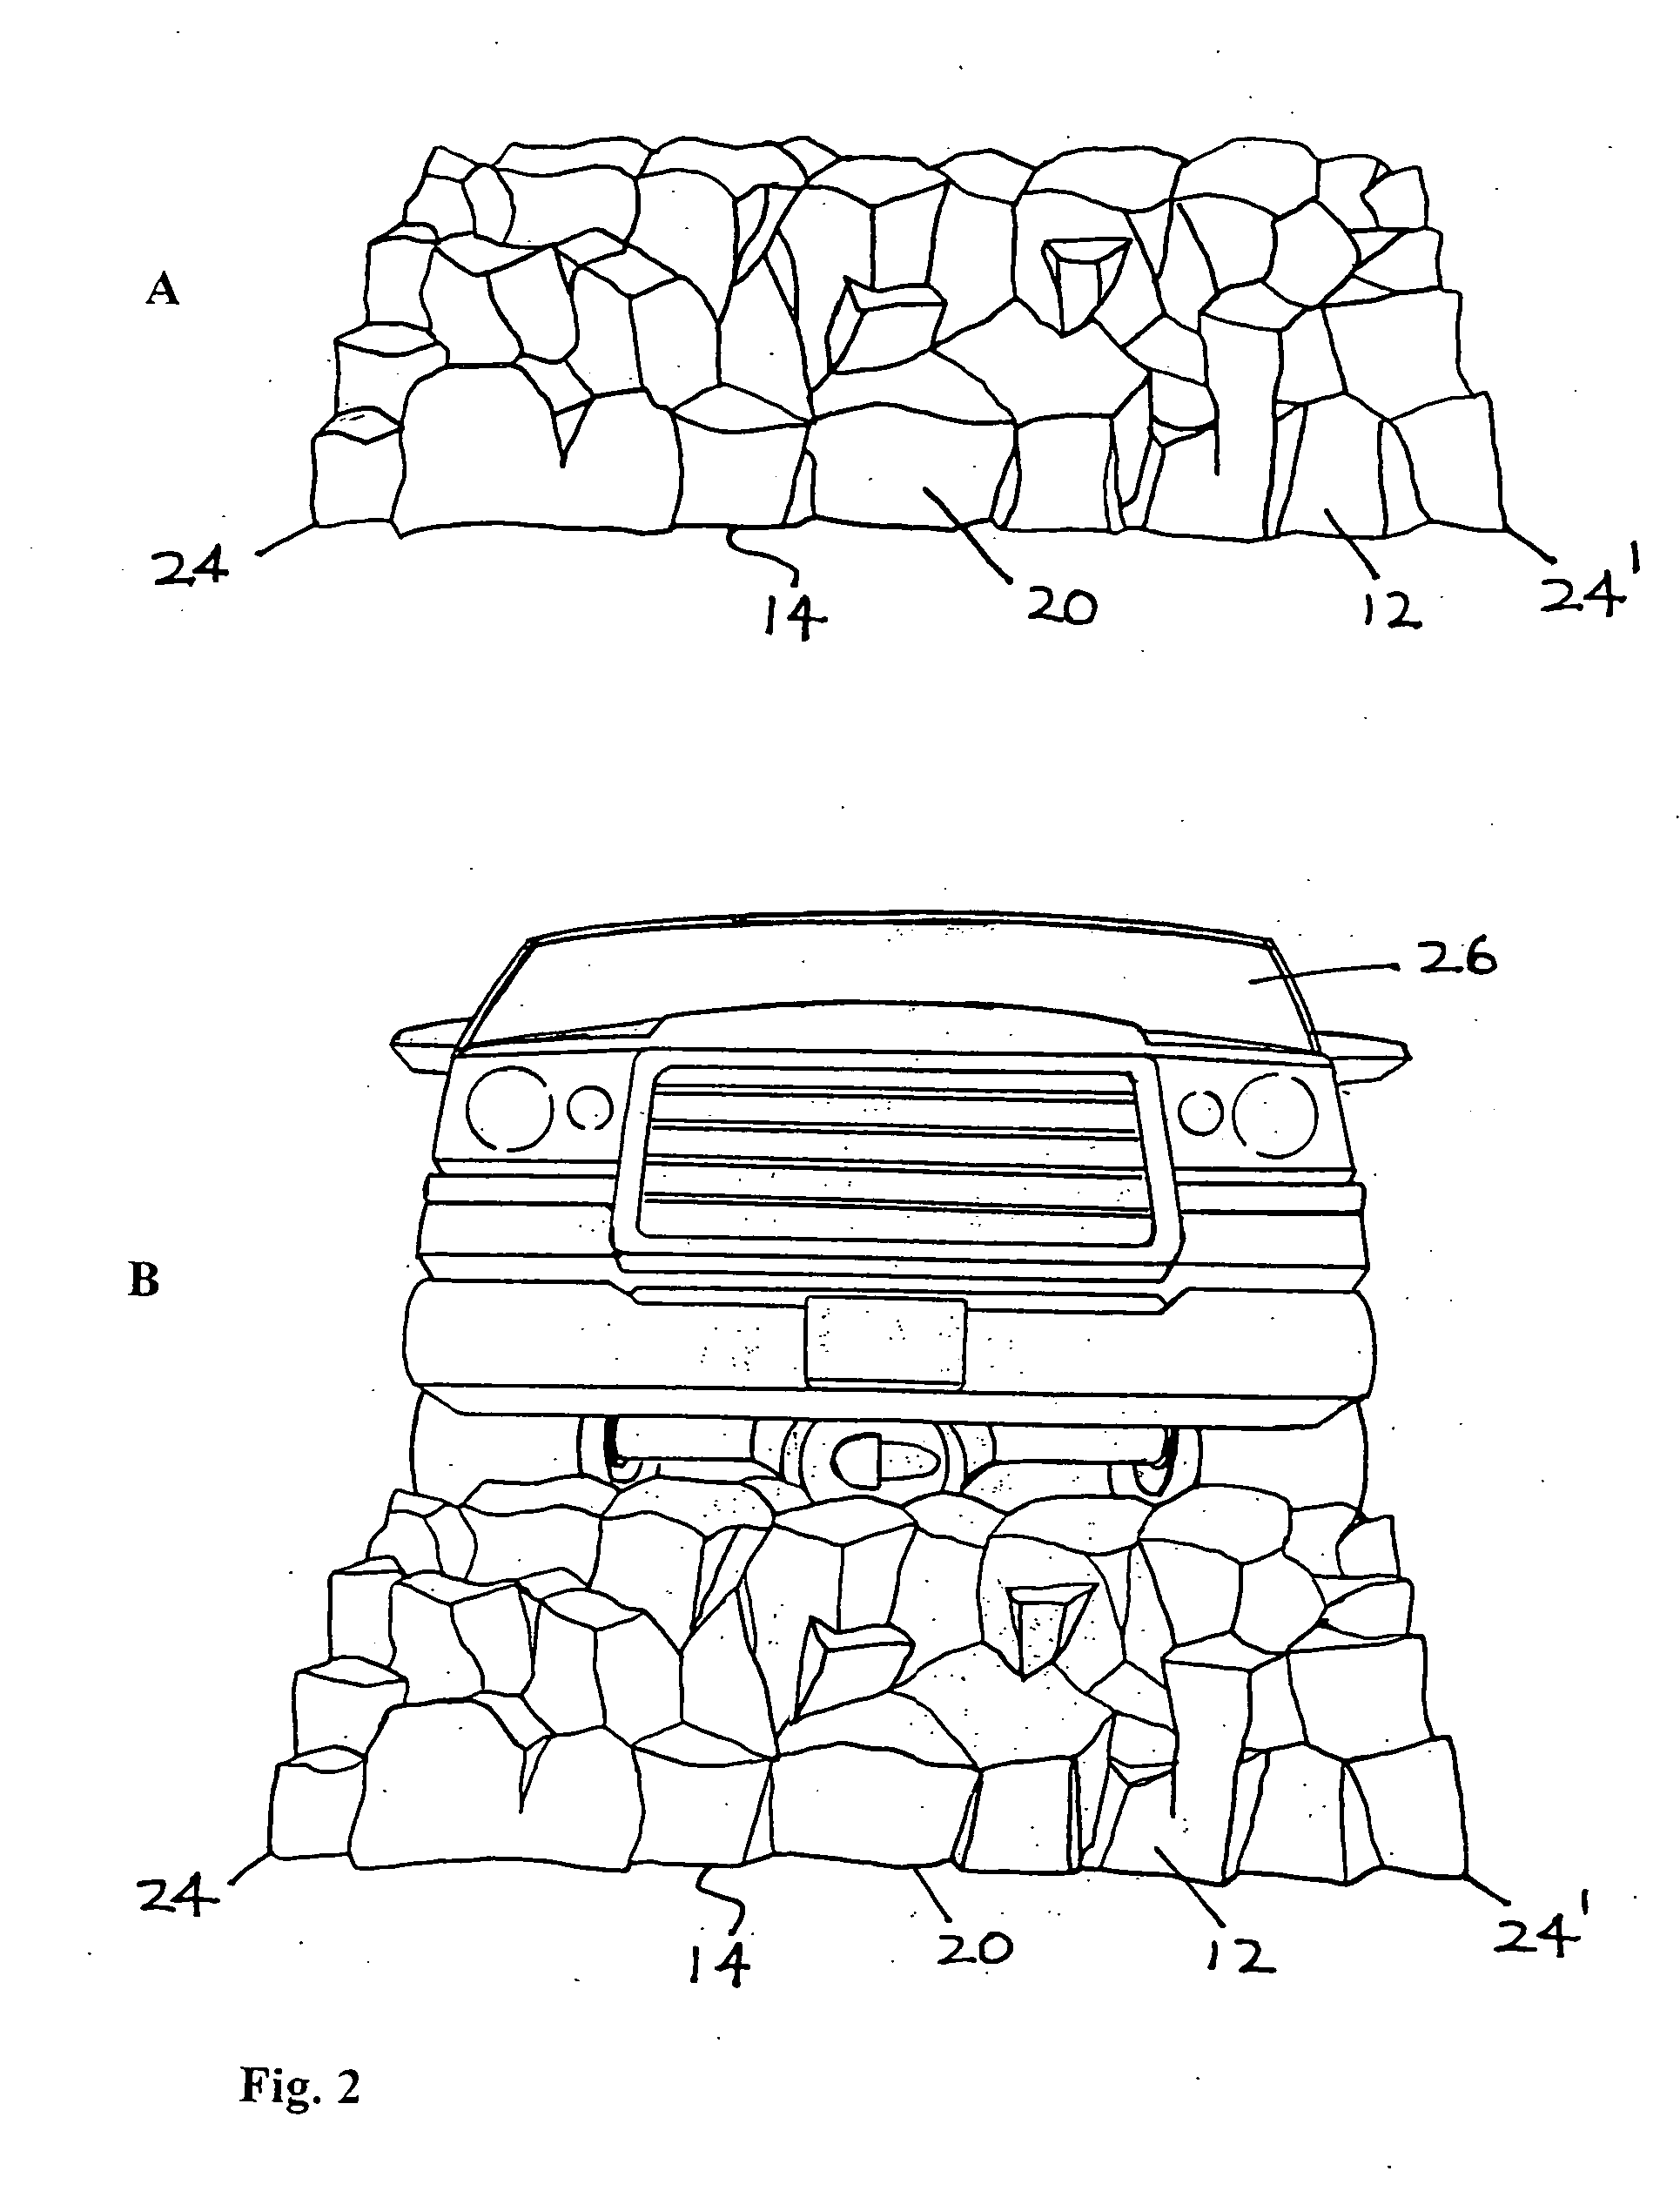 Method and composition for car ramp concealing fiberglass artificial geological rock formation